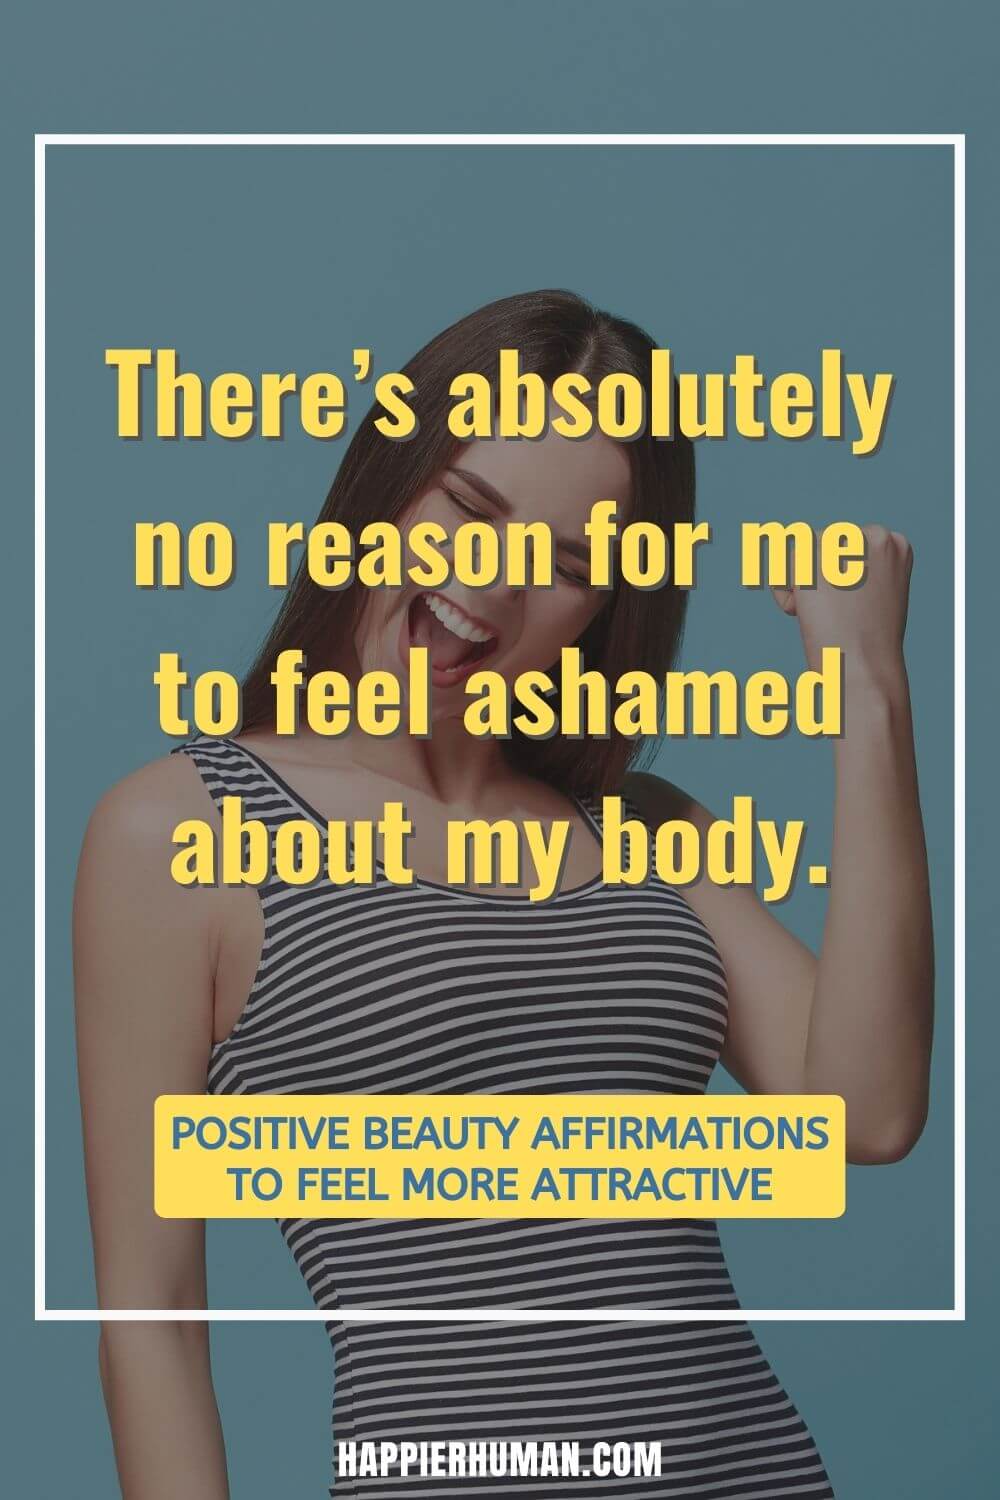 Beauty Affirmations - There’s absolutely no reason for me to feel ashamed about my body. | beauty affirmations reddit | beautiful face affirmations | beauty affirmations pdf